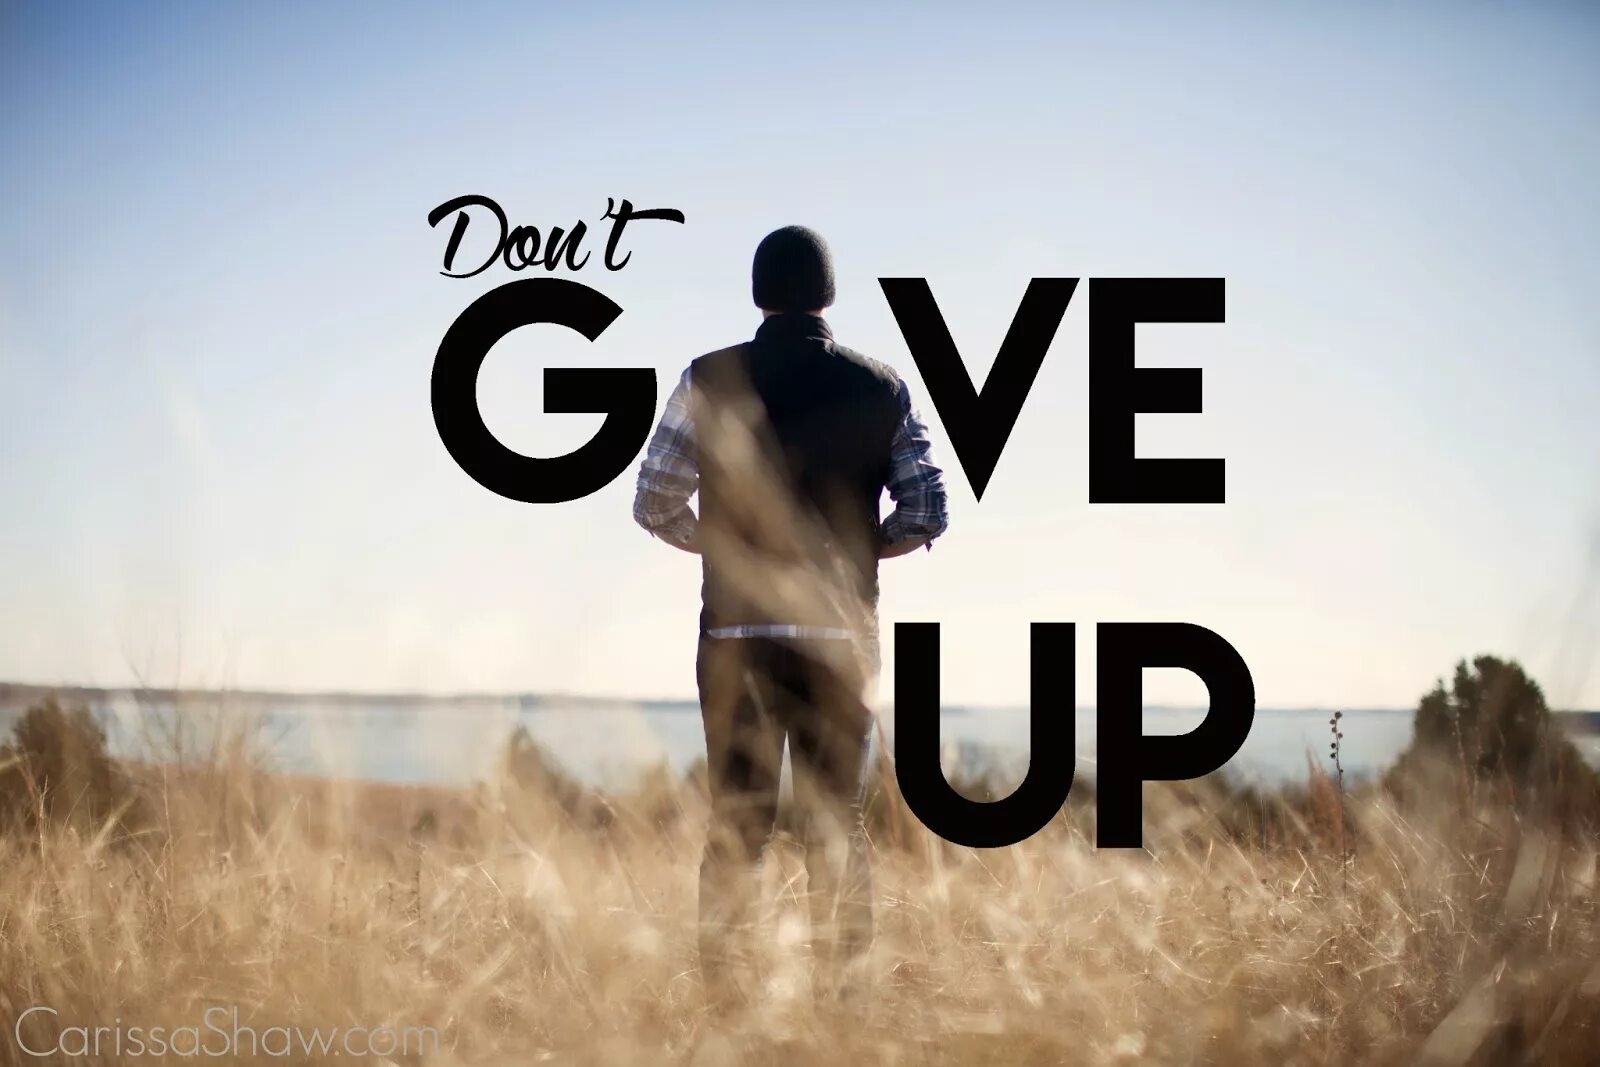 He will not give. Don`t give up. Don't give up картинка. Надпись don't give up. Never give up картинки.